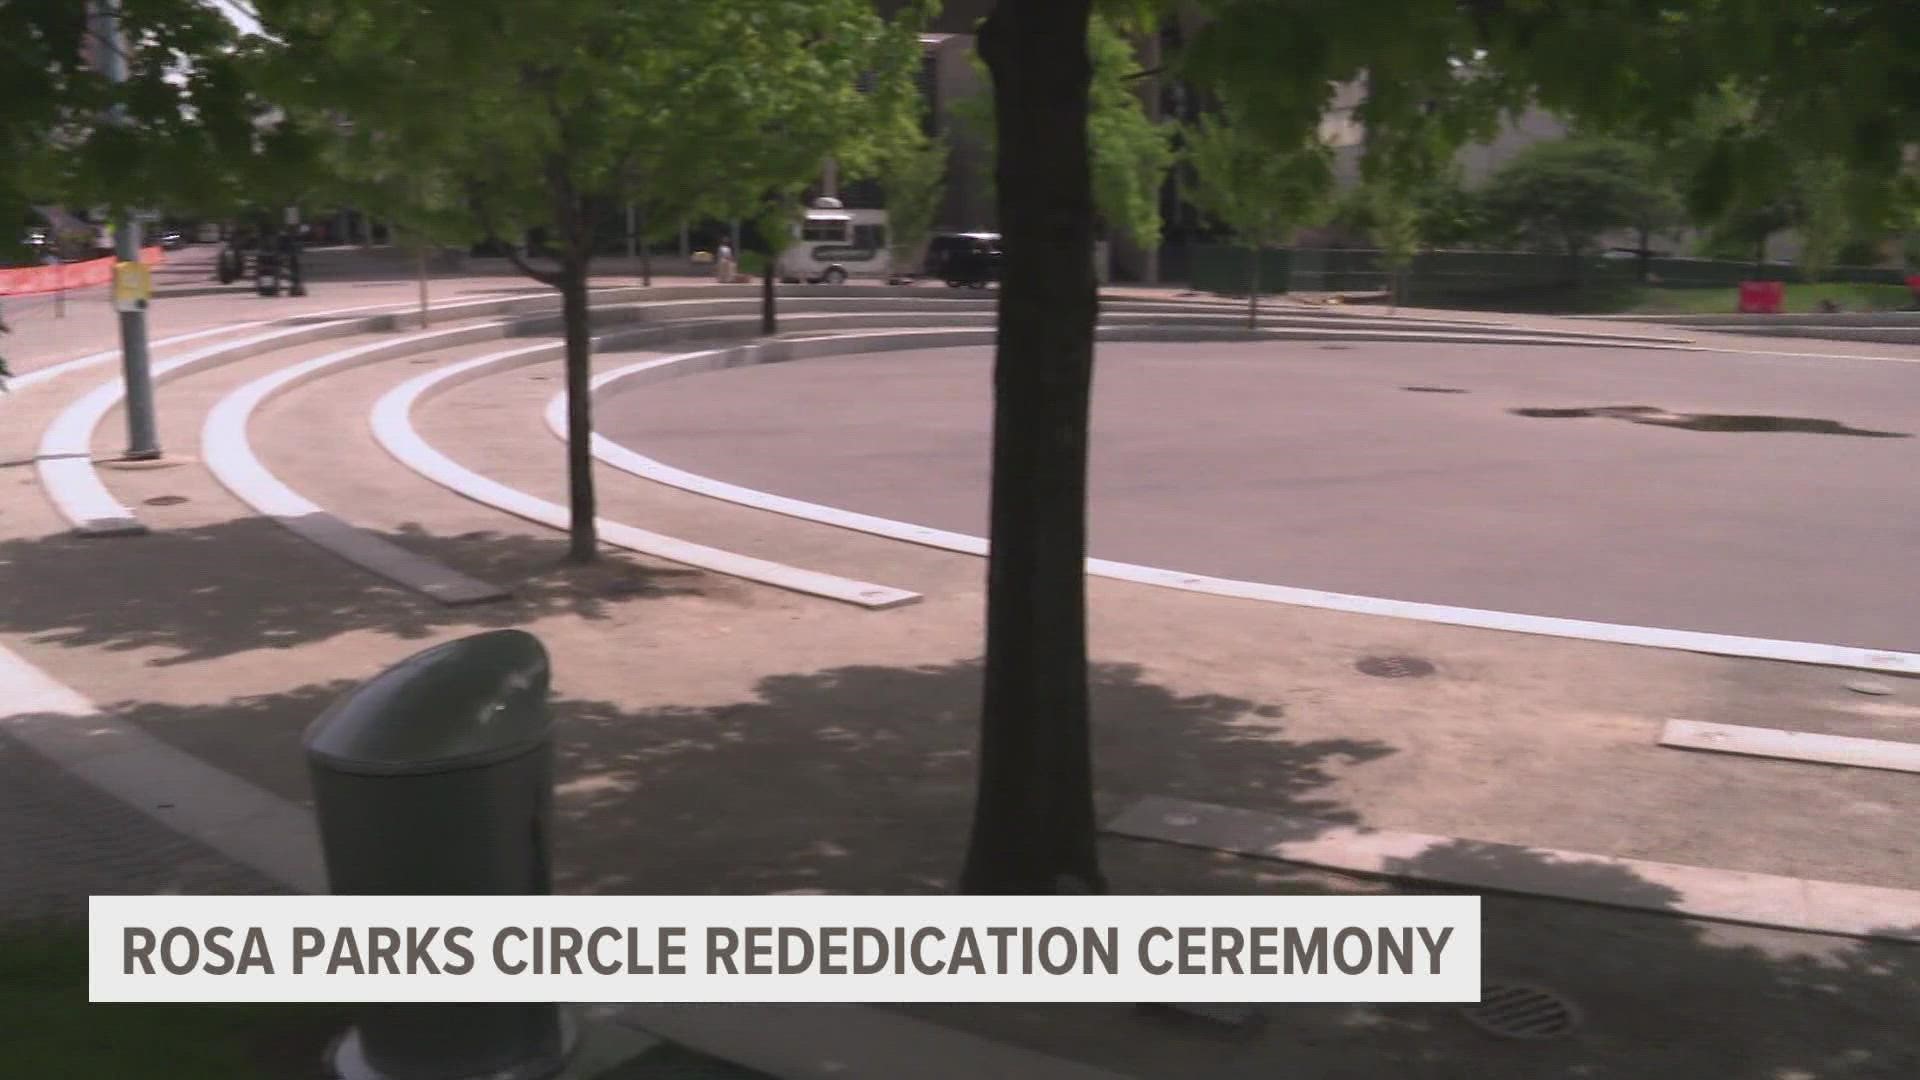 With the completion of the restoring project for the Rosa Parks Circle, many gather at a rededication ceremony to celebrate its reopening.